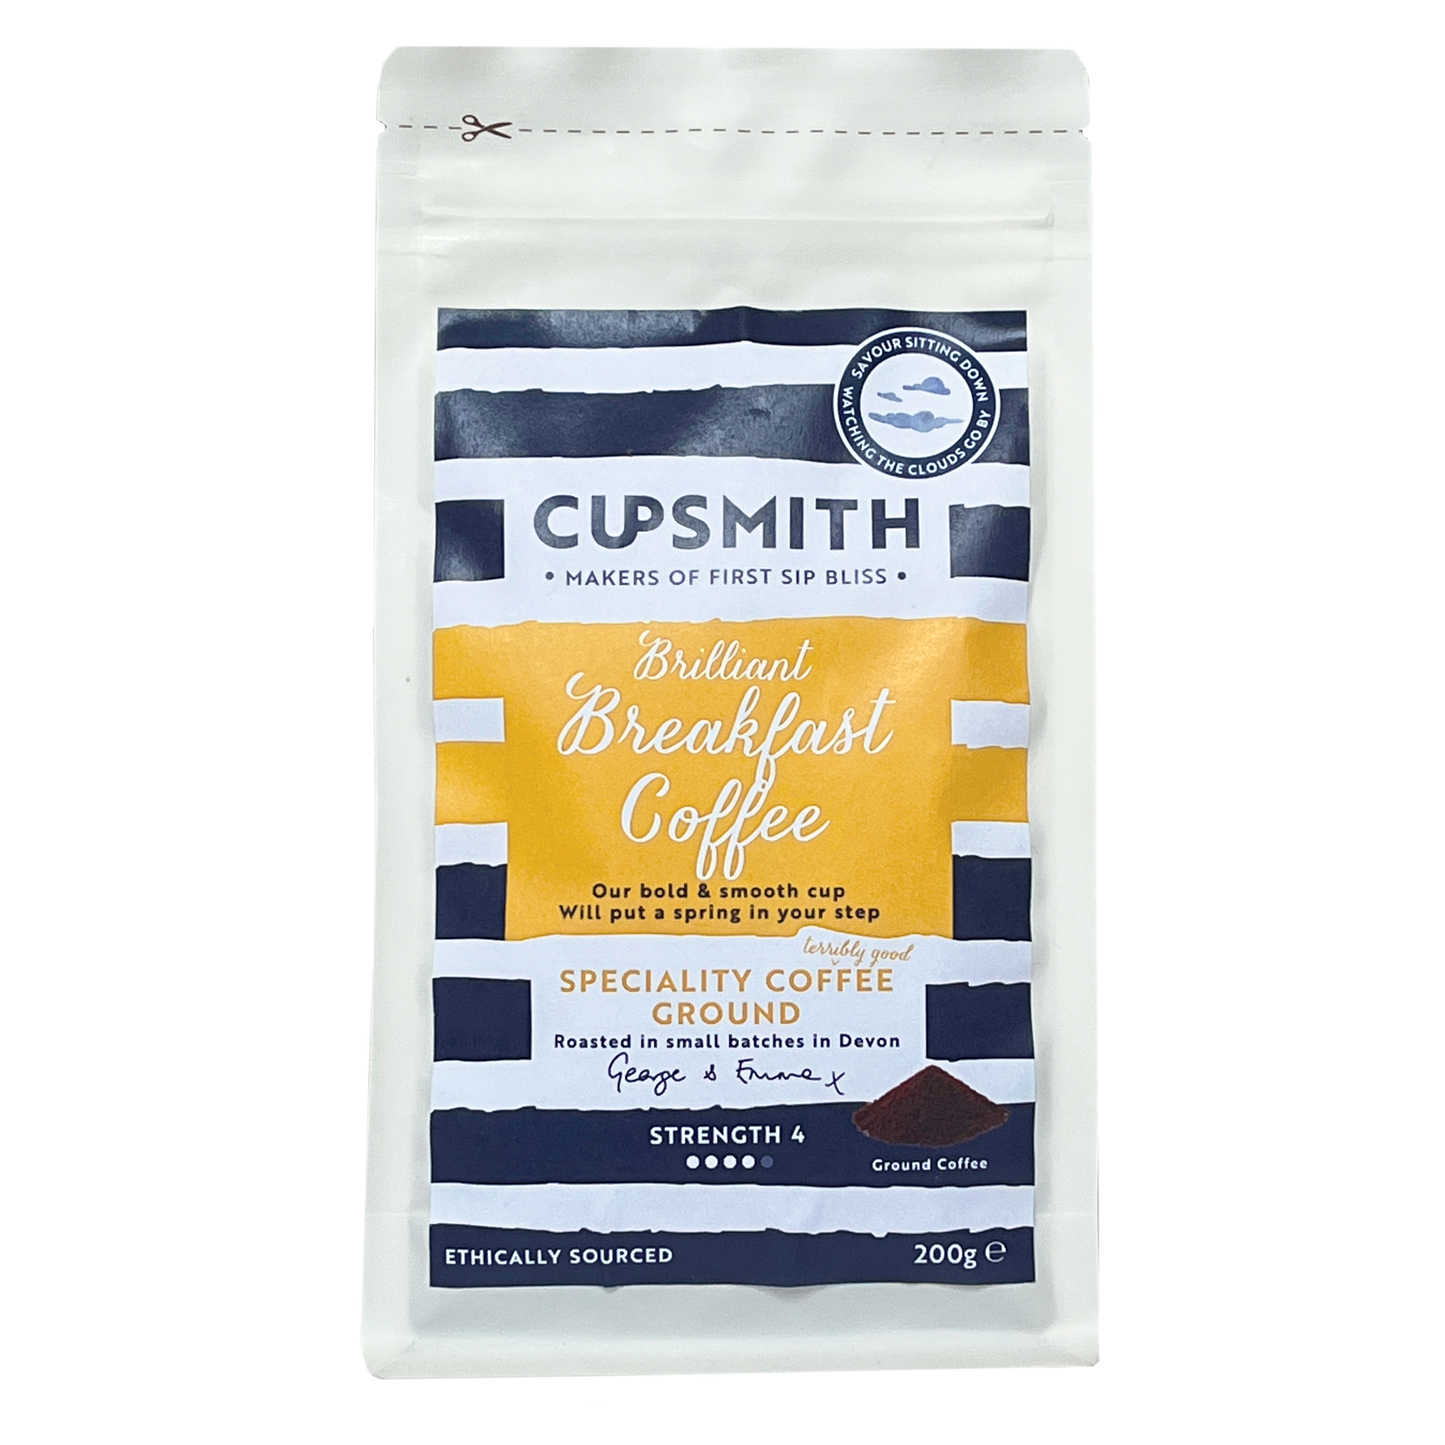 Cupsmith Speciality Breakfast Coffee - beans & ground